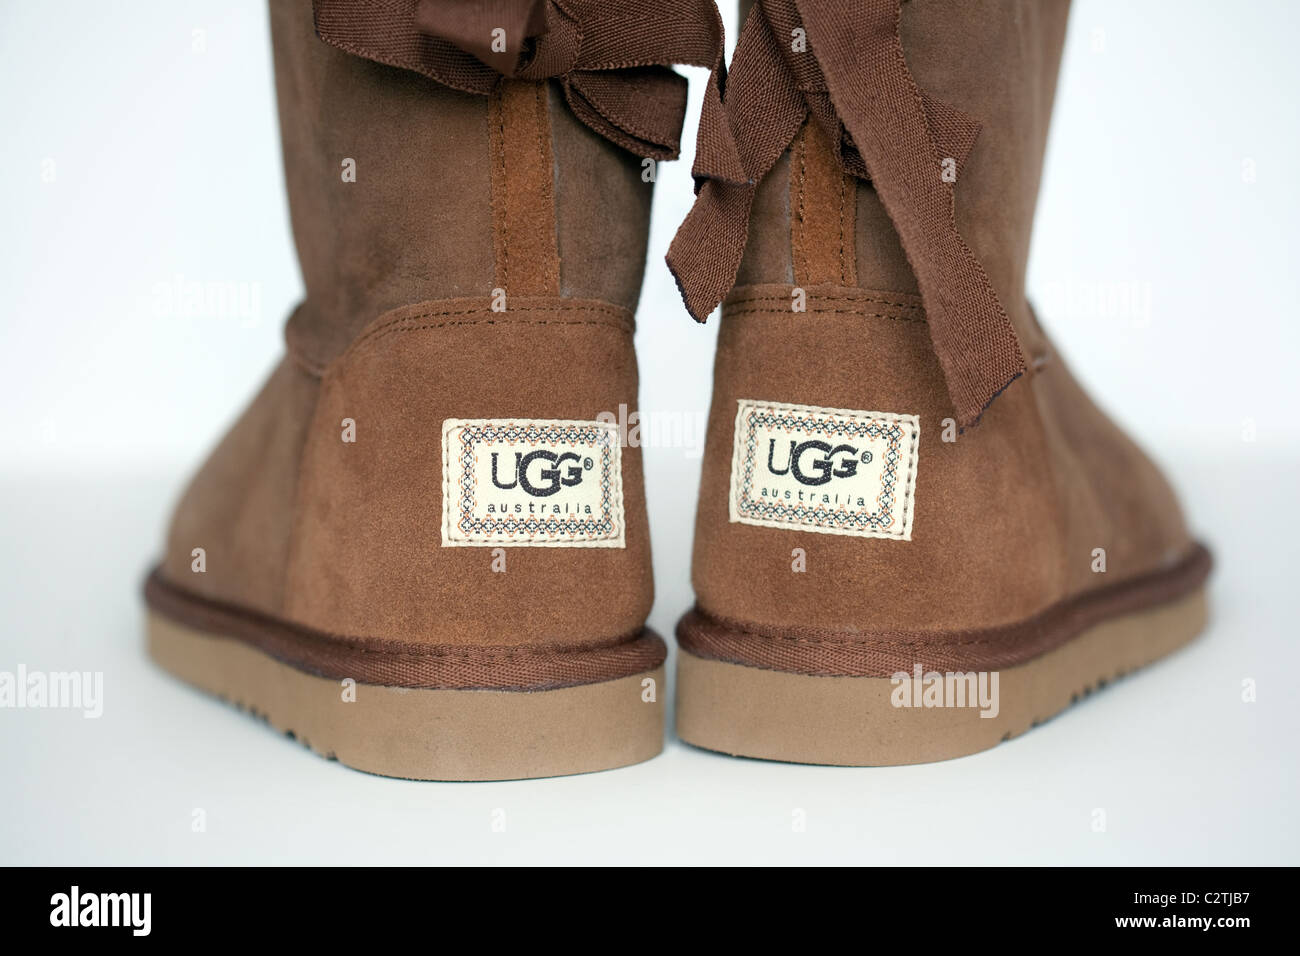 uggs made in